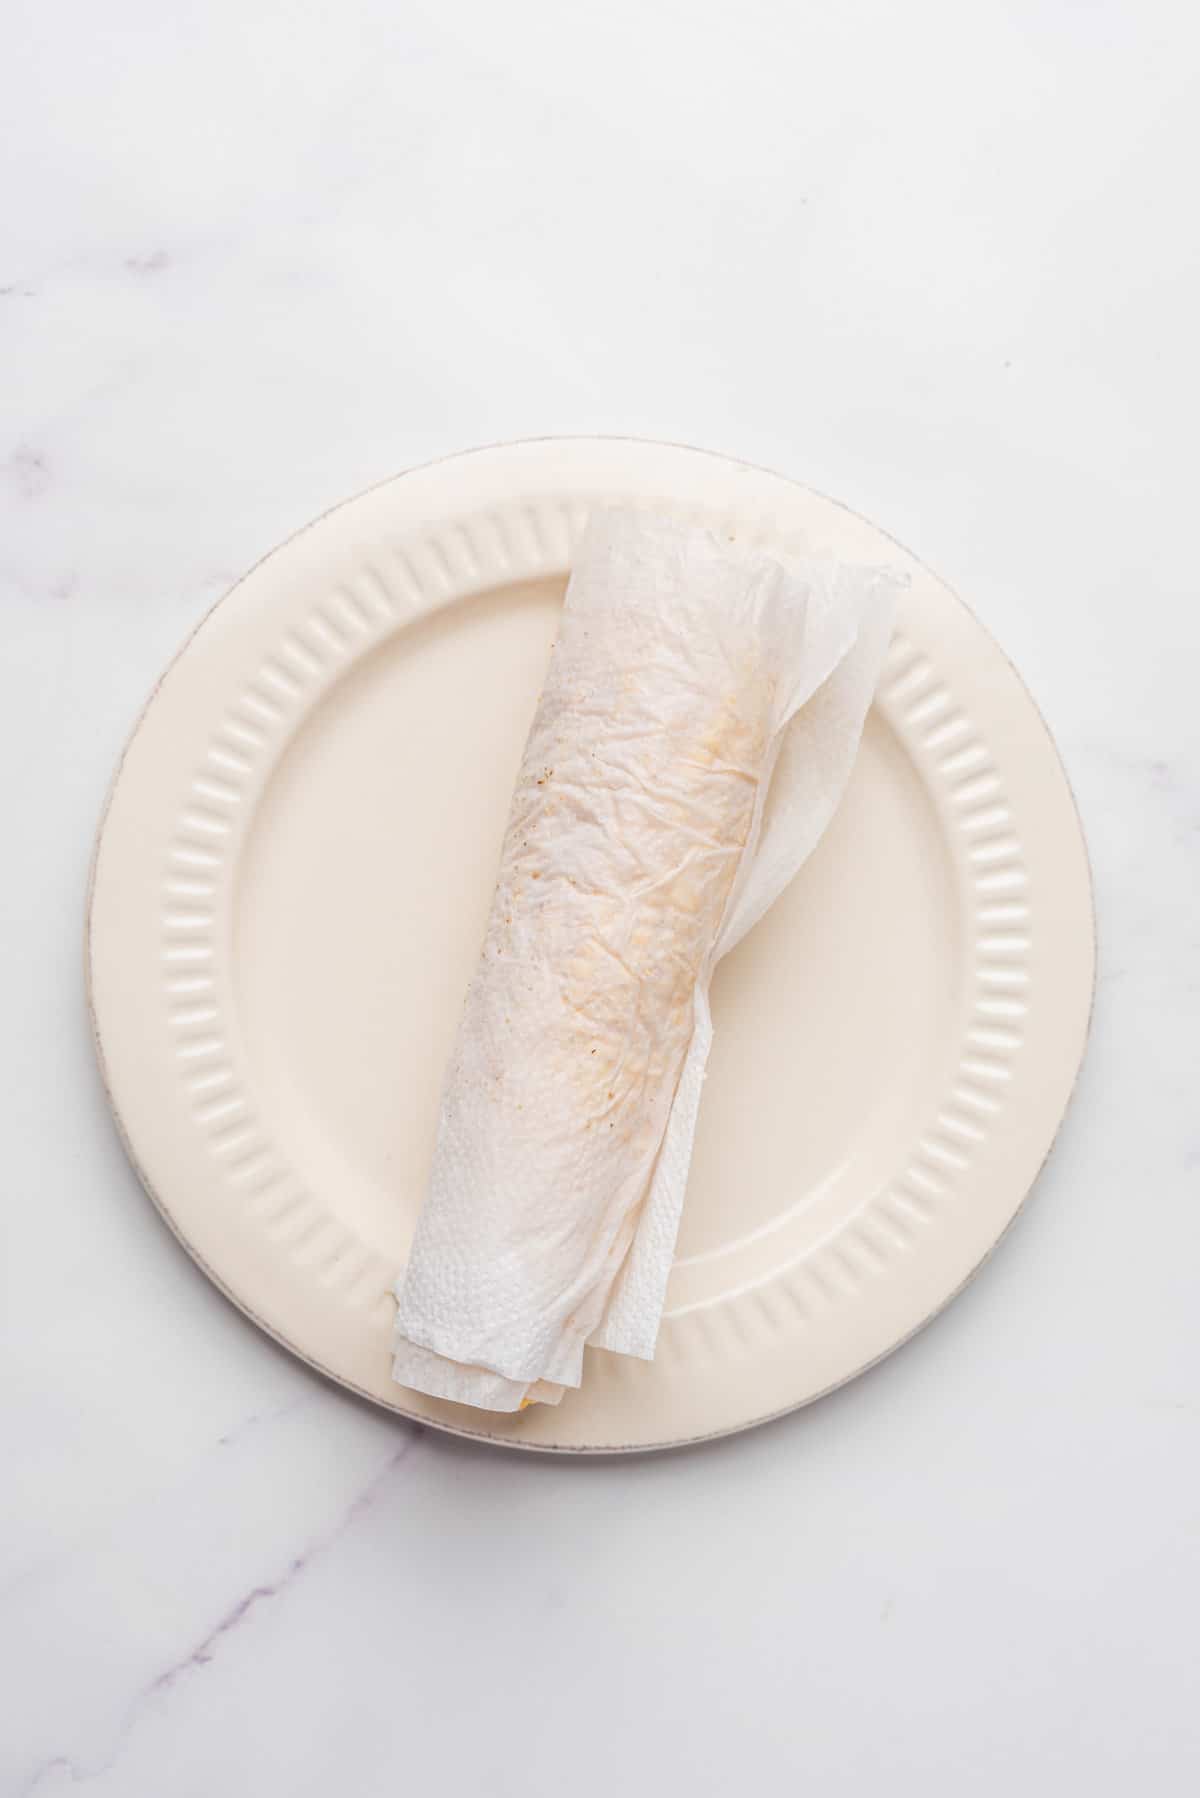 An image of a corn covered with a damp paper towel on a microwave-safe dish